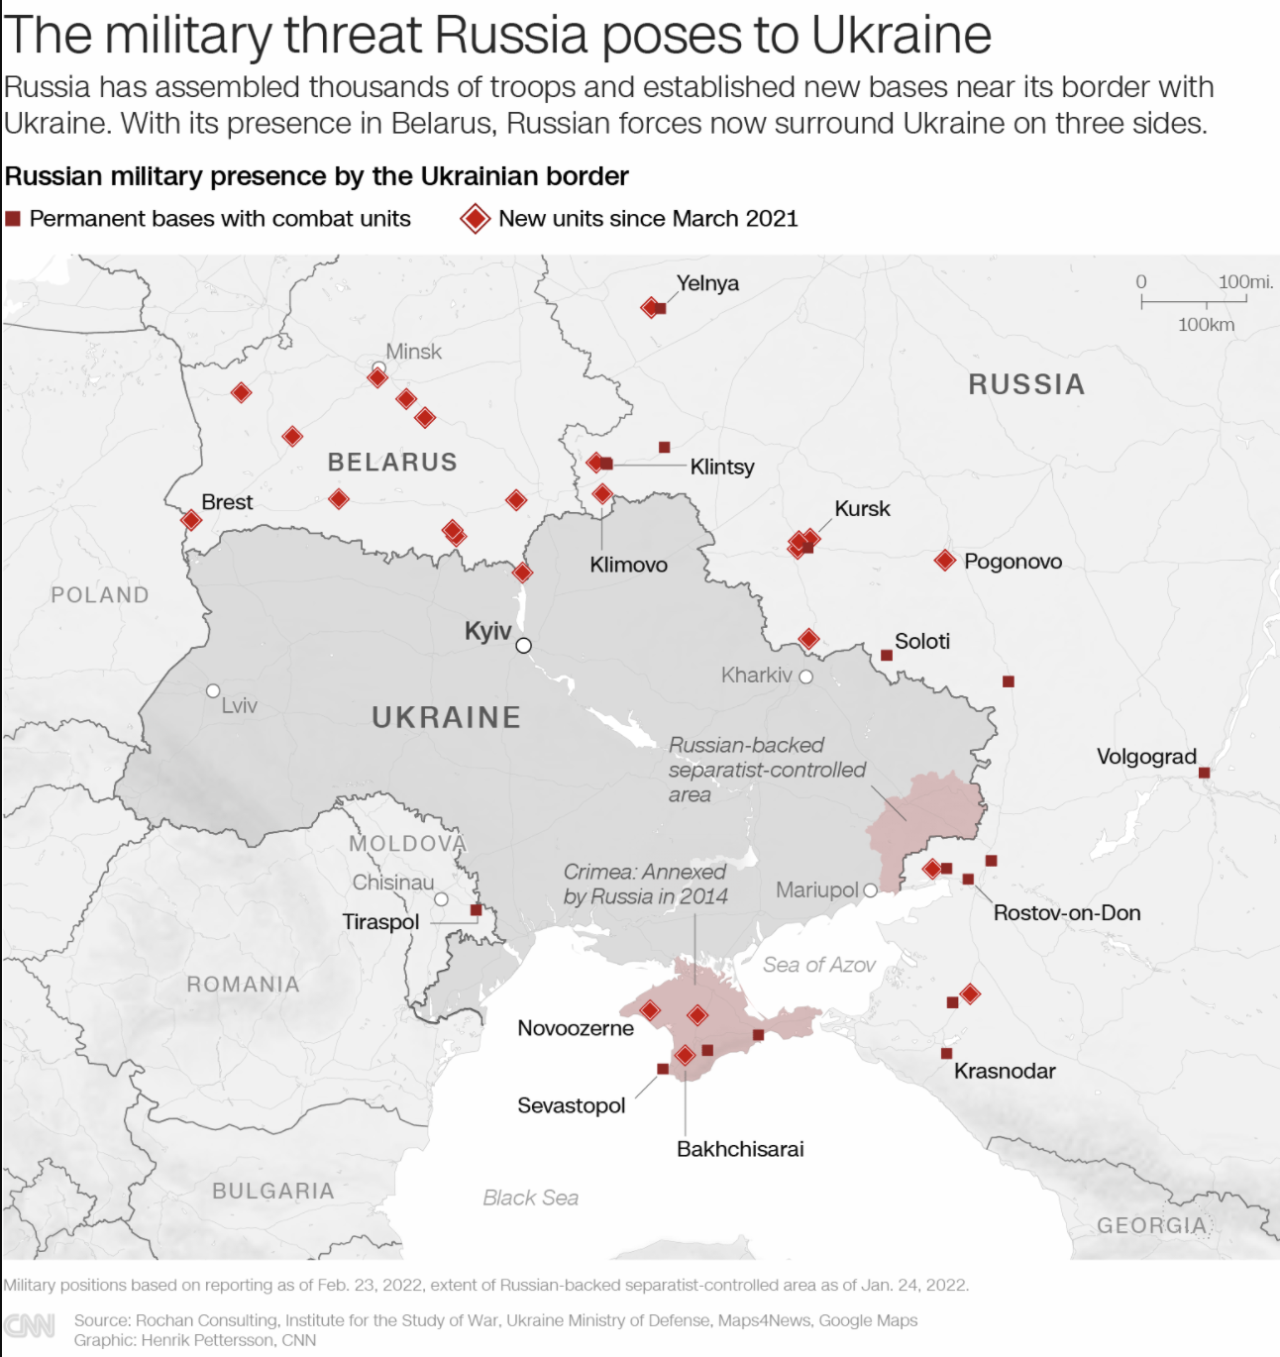 Russia has surrounded Ukraine from three sides